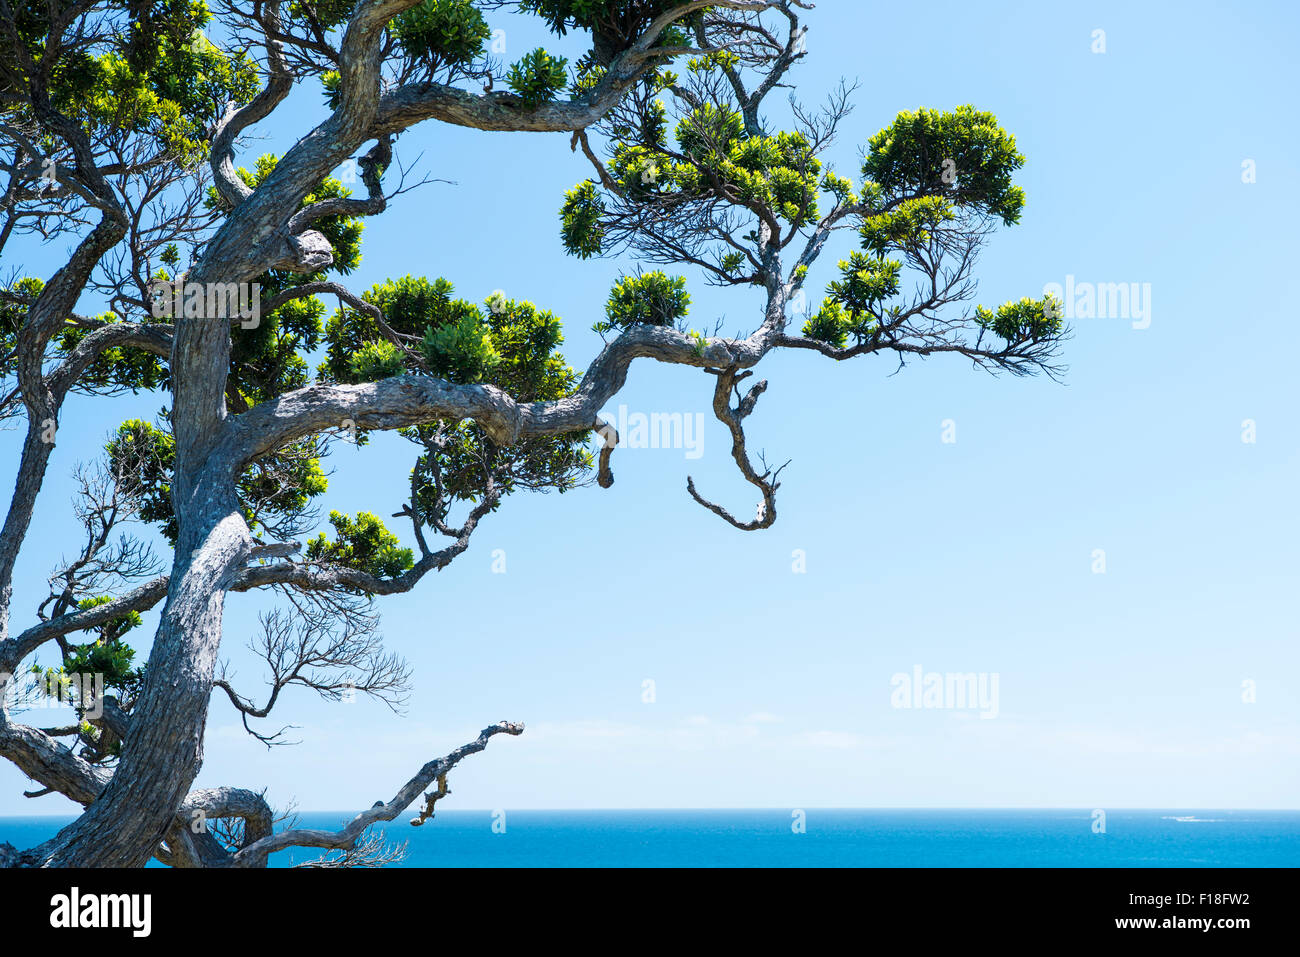 And old pohutukawa tree against a clear blue sky in Bay of Islands, New Zealand Stock Photo